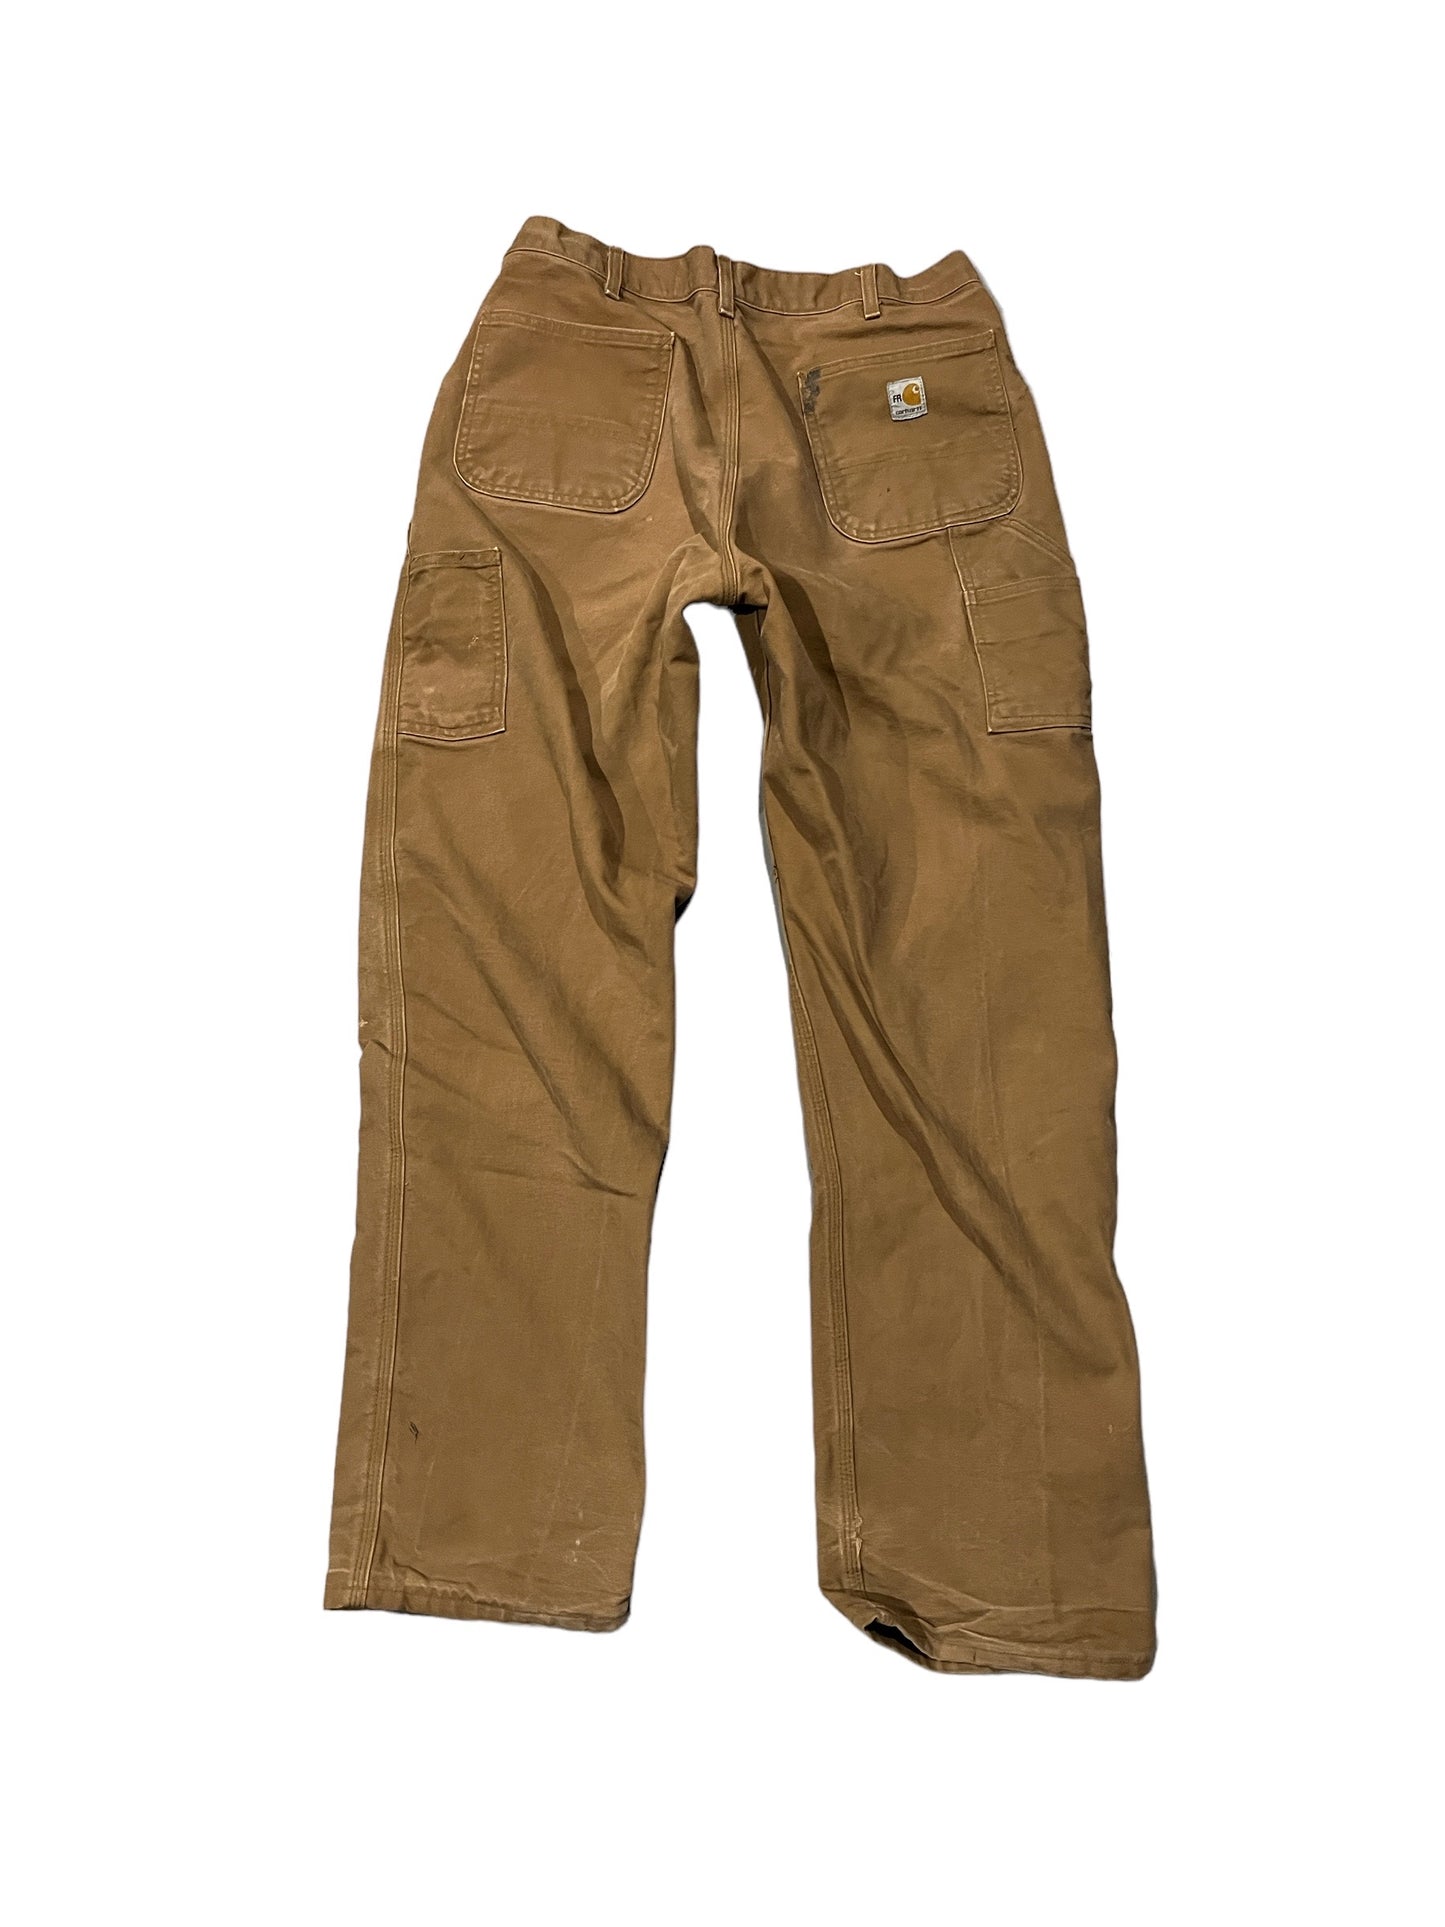 Vintage Carhartt Relaxed Pants - Caramel Brown